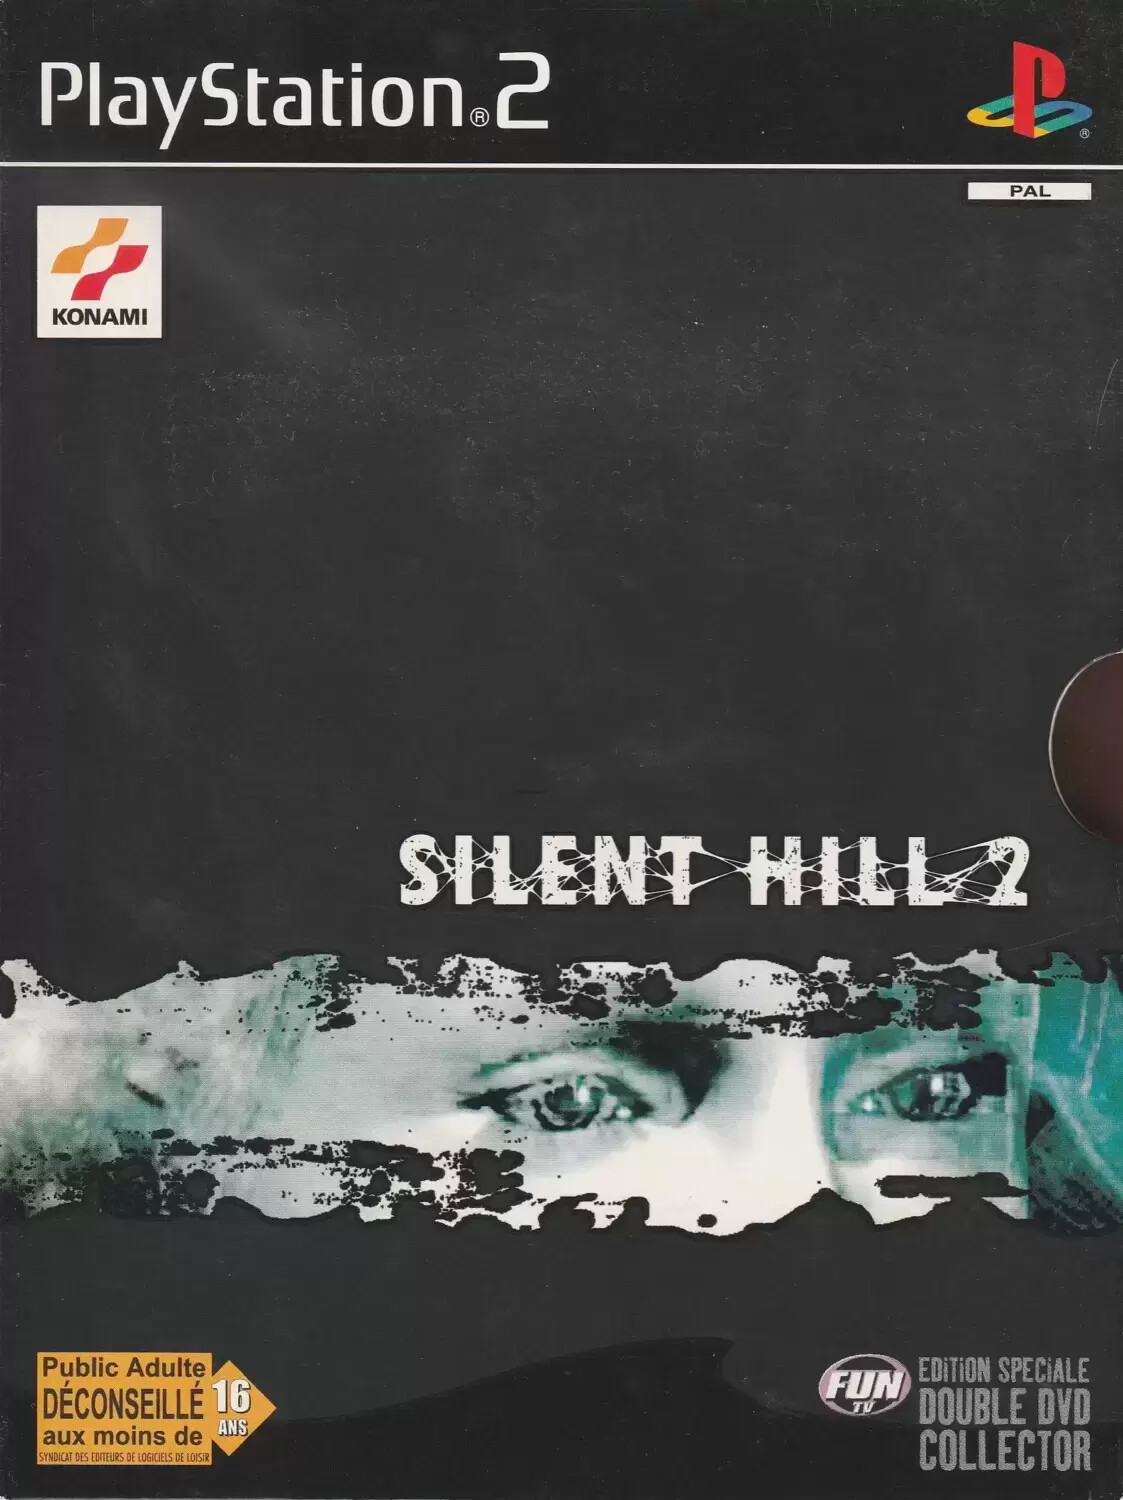 PS2 Games - Silent Hill 2